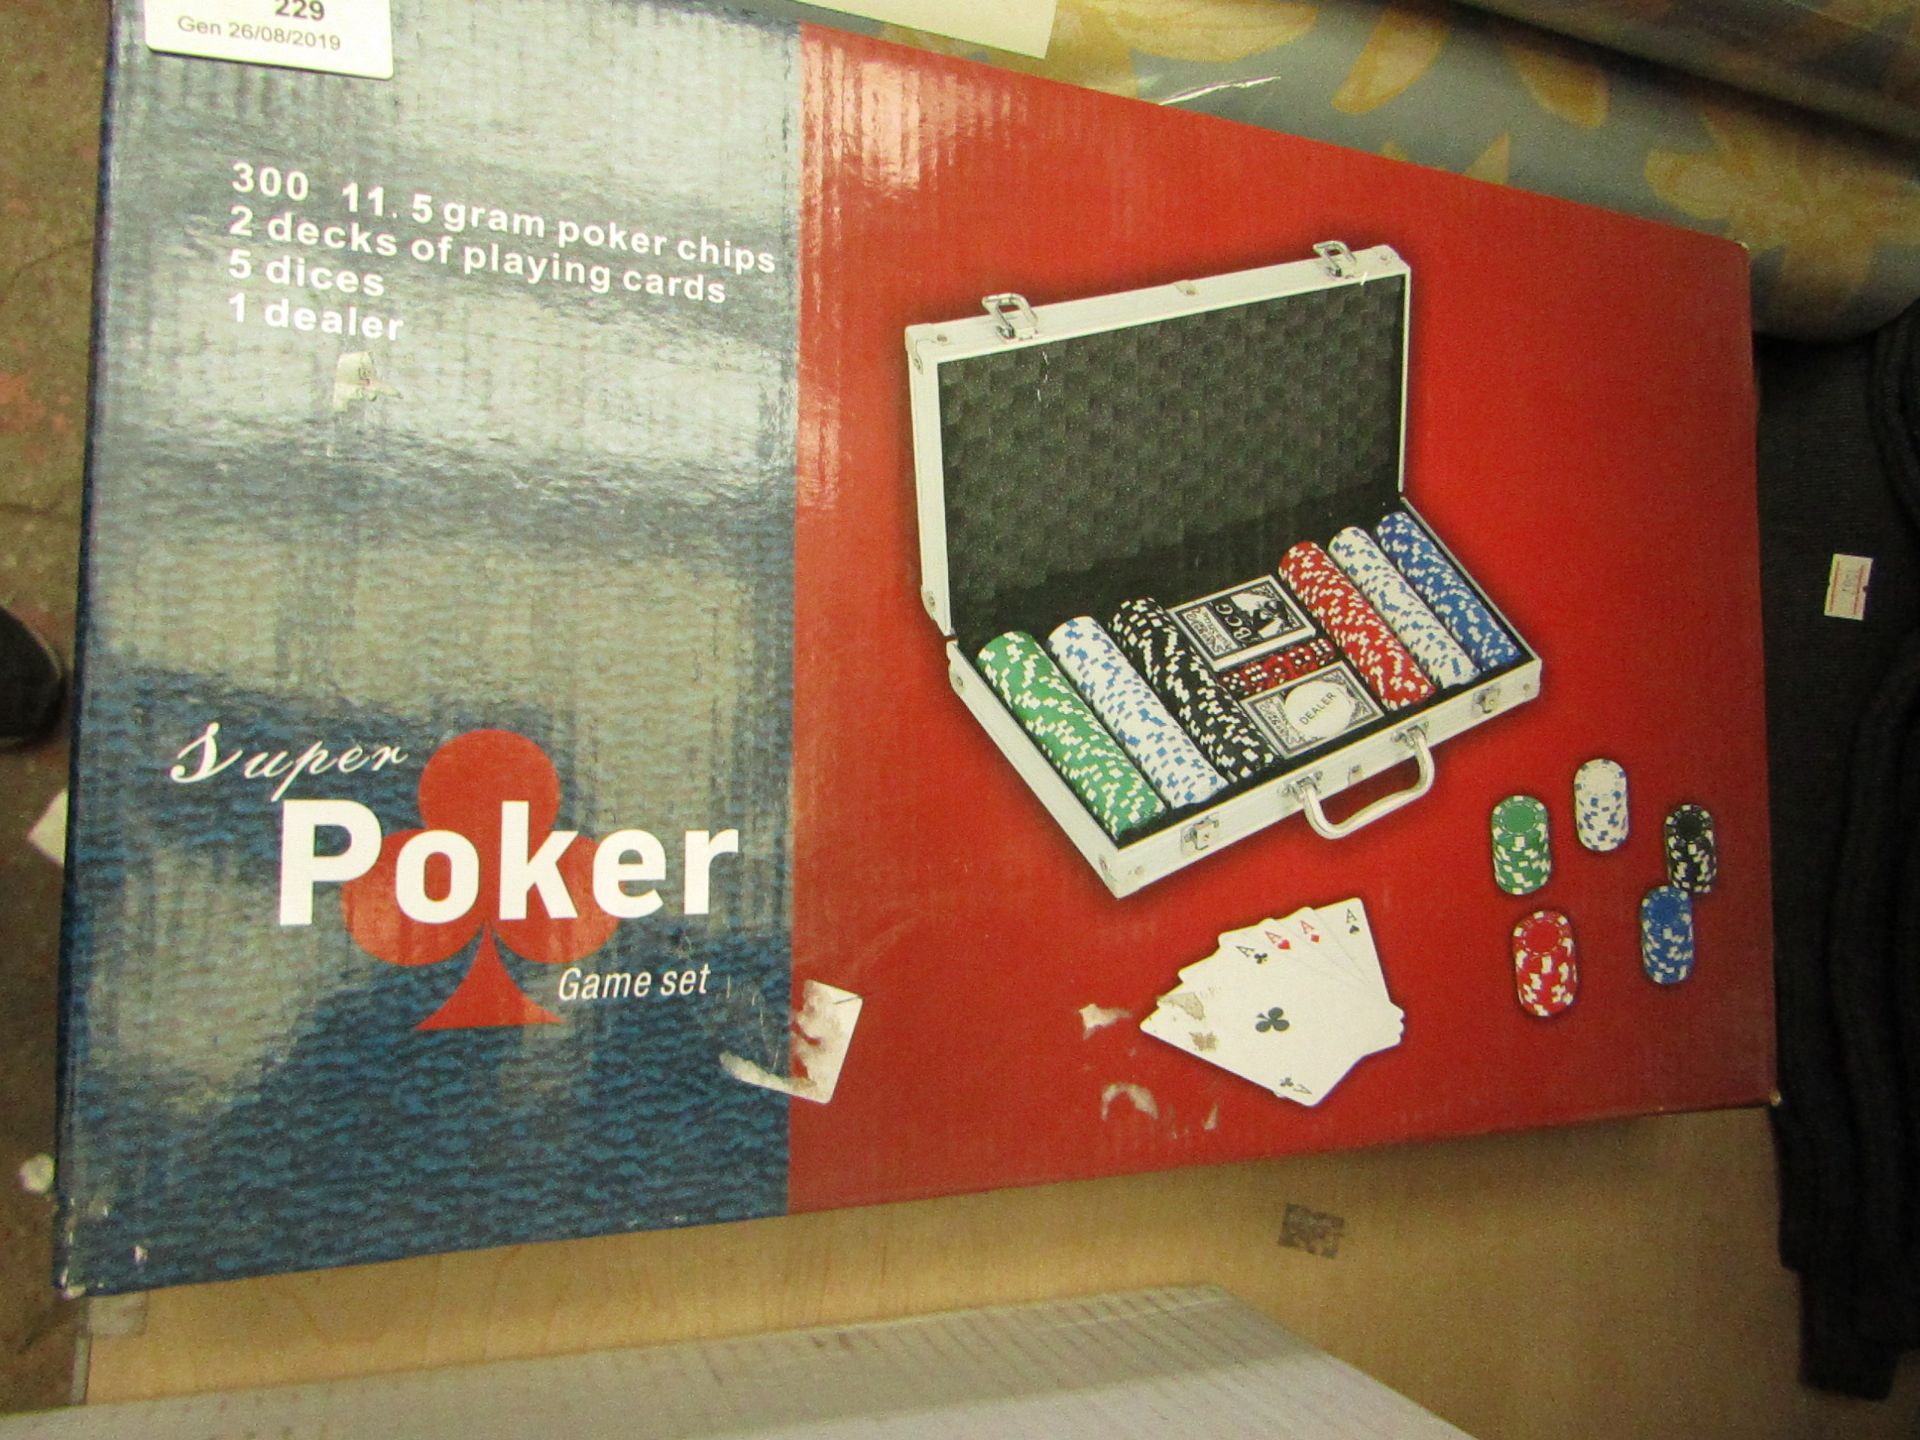 300 Chip Super Poker Game Set packaged  (1 PK of chips are missing )